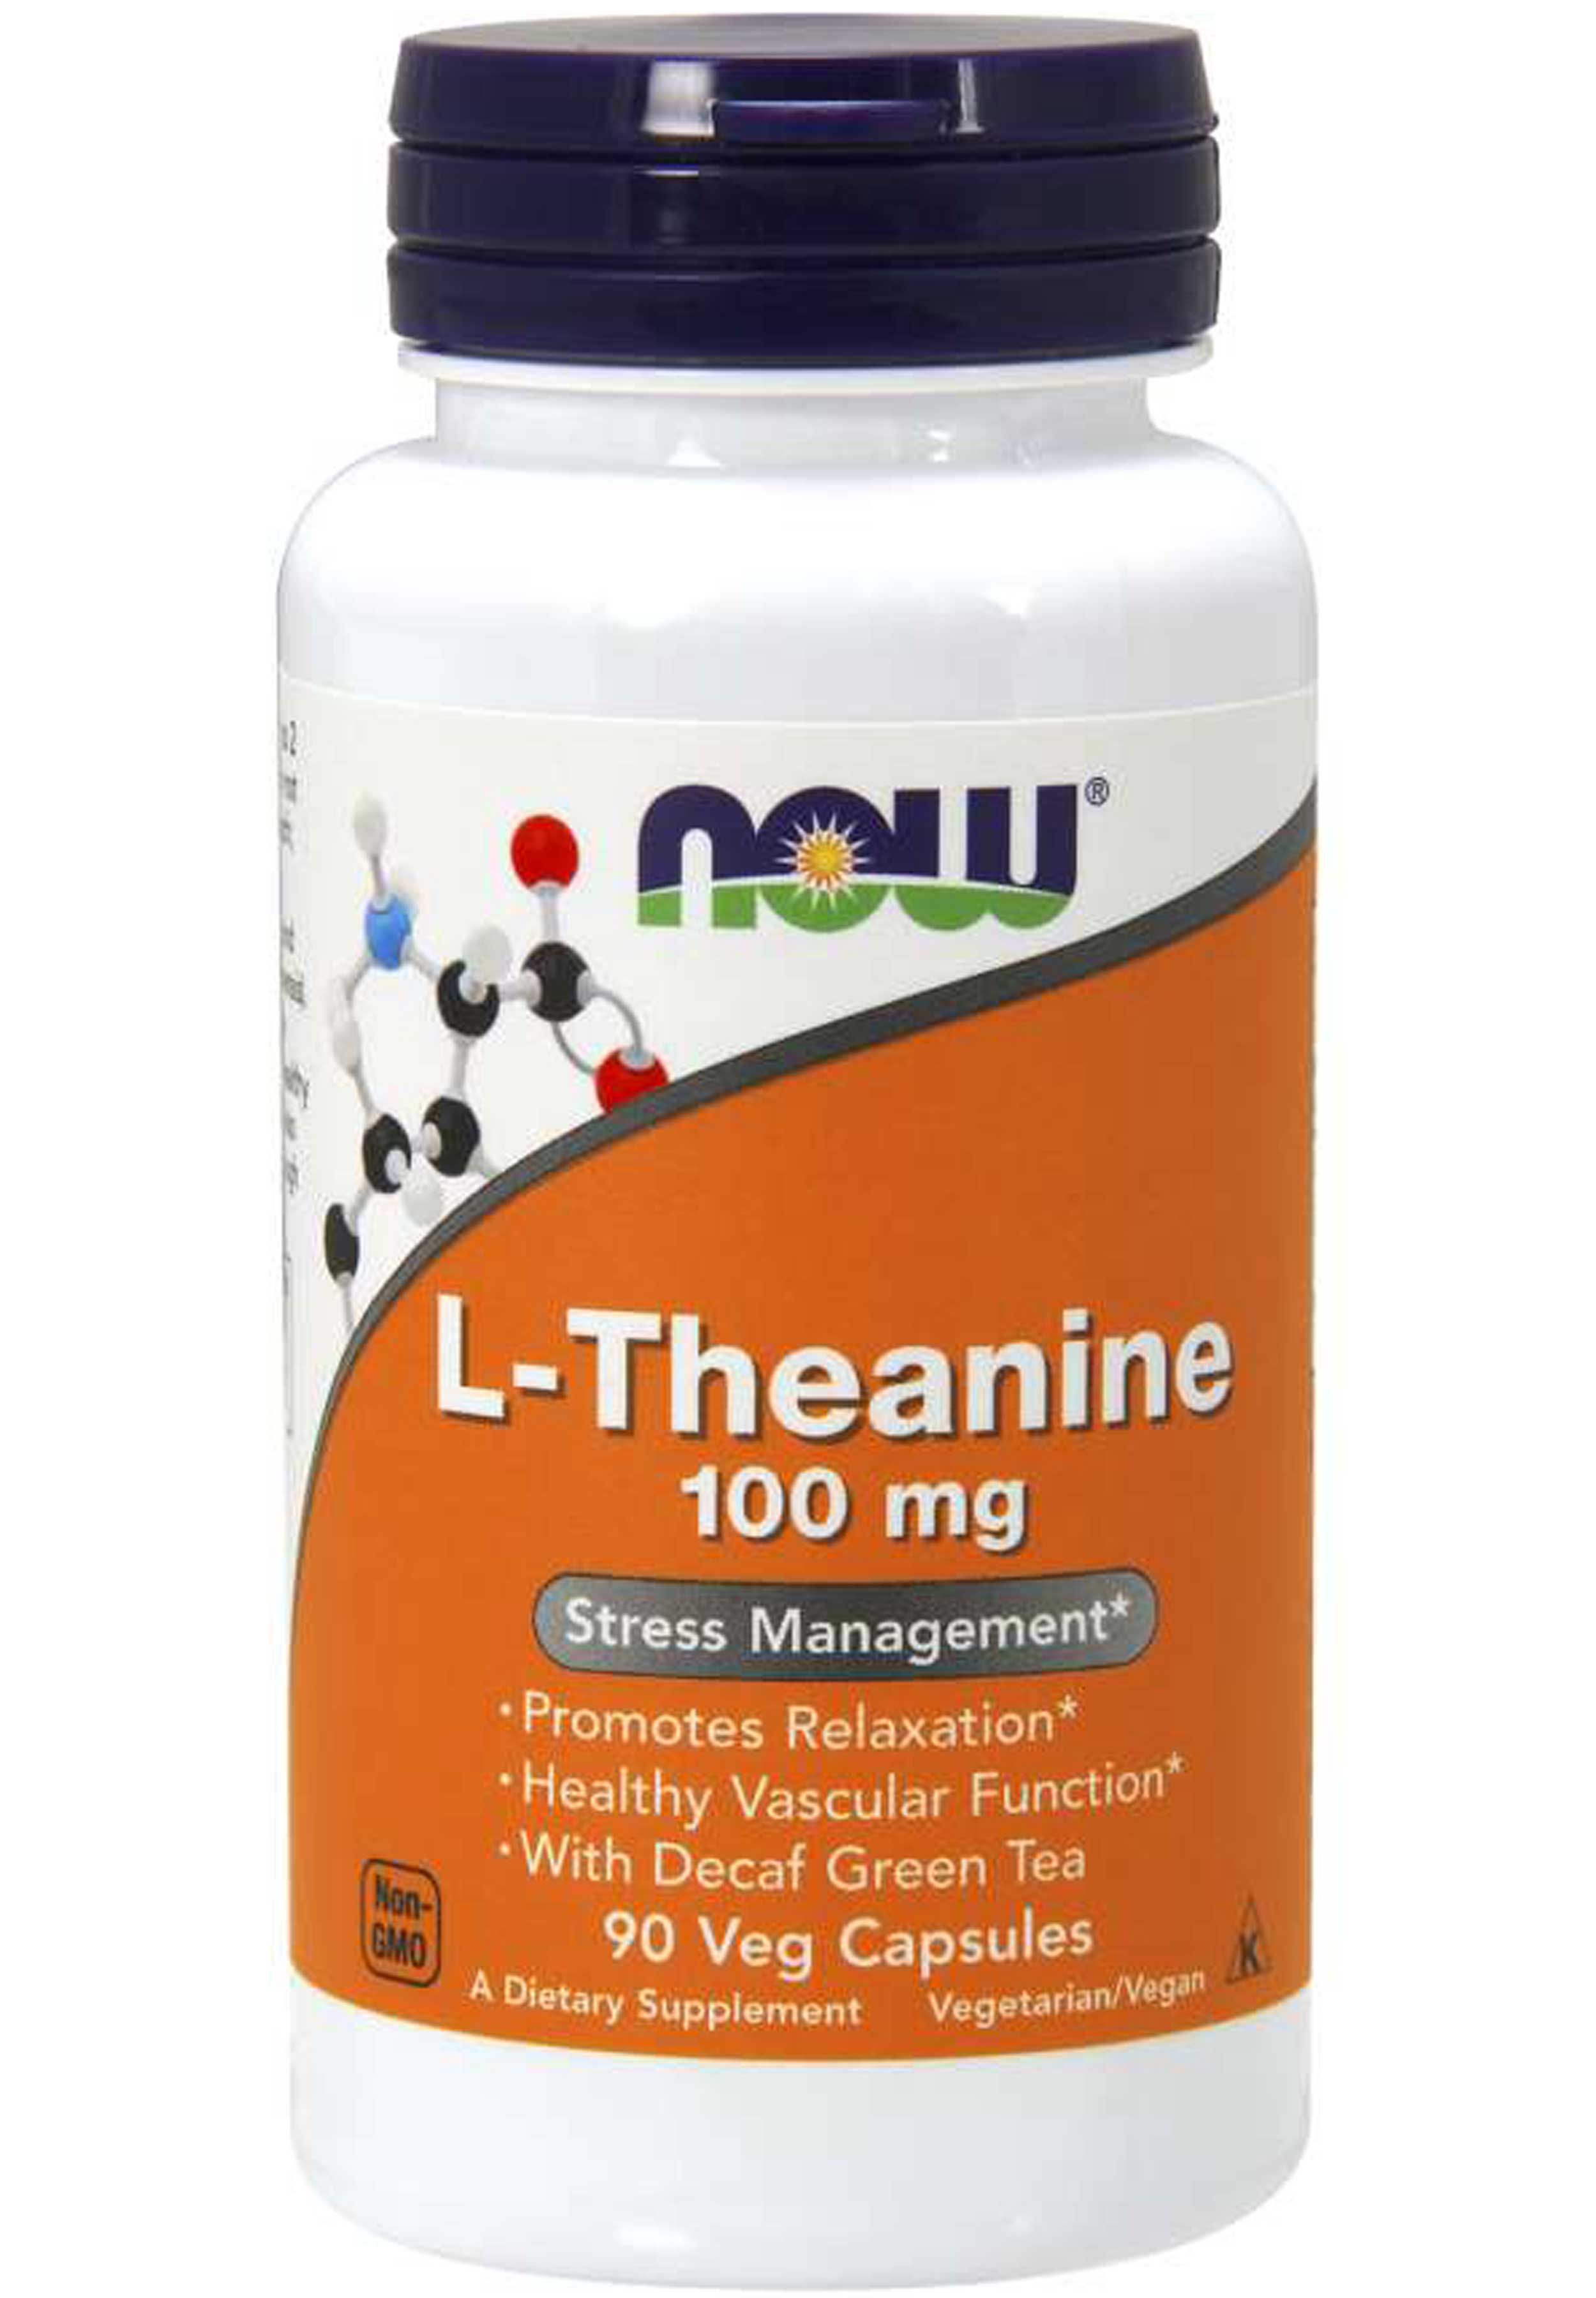 NOW L-Theanine